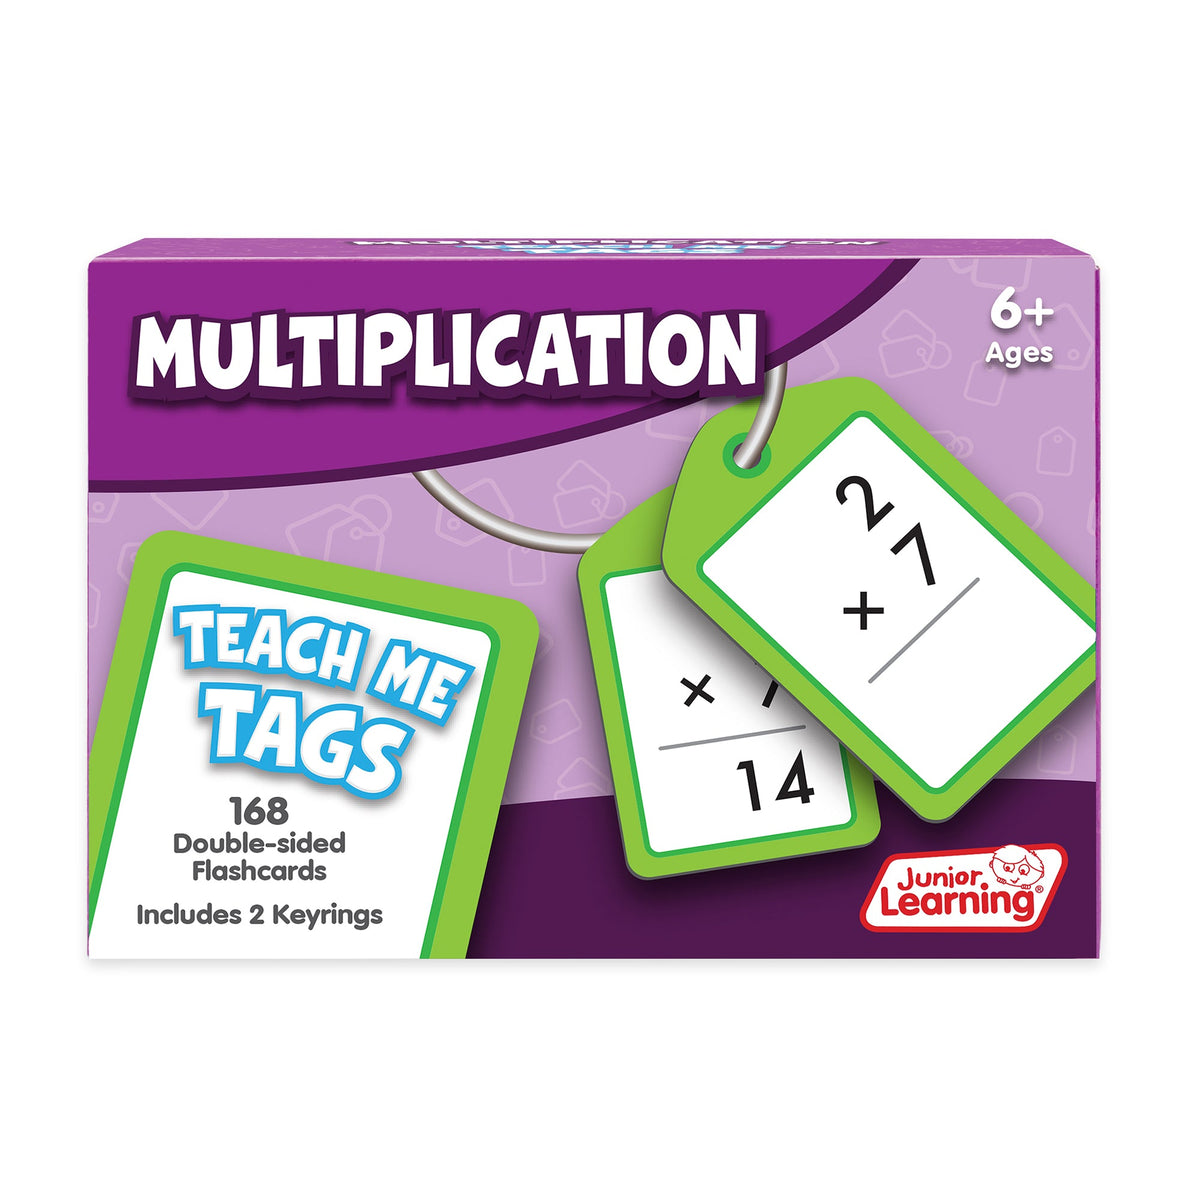 Junior Learning JL632 Multiplication Teach Me Tags box faced front